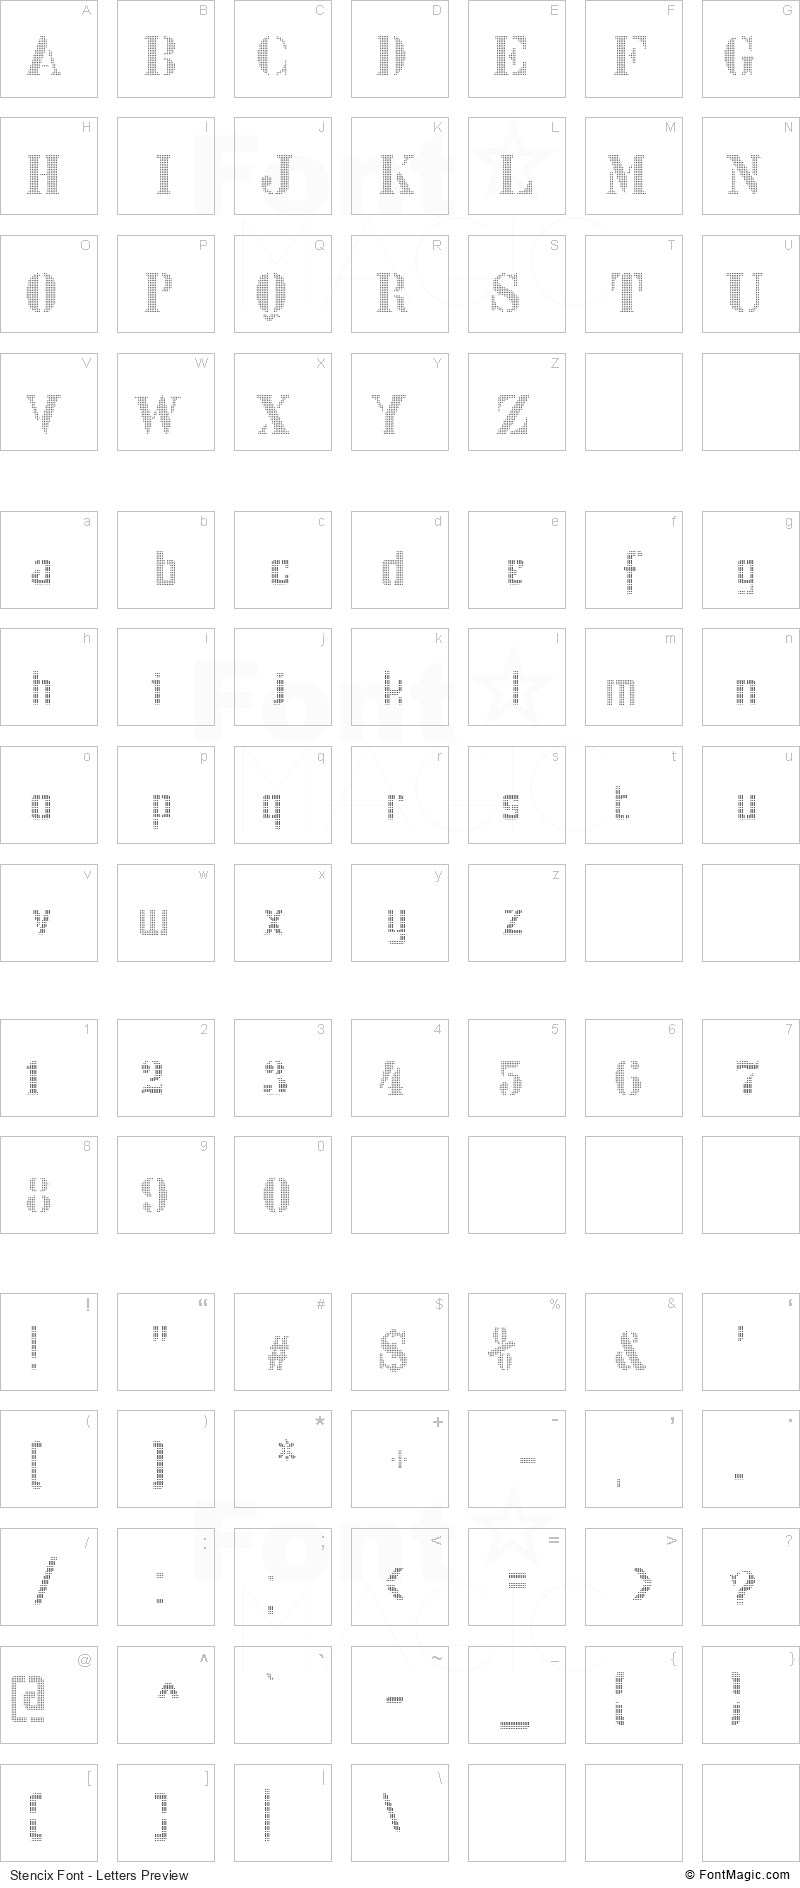 Stencix Font - All Latters Preview Chart